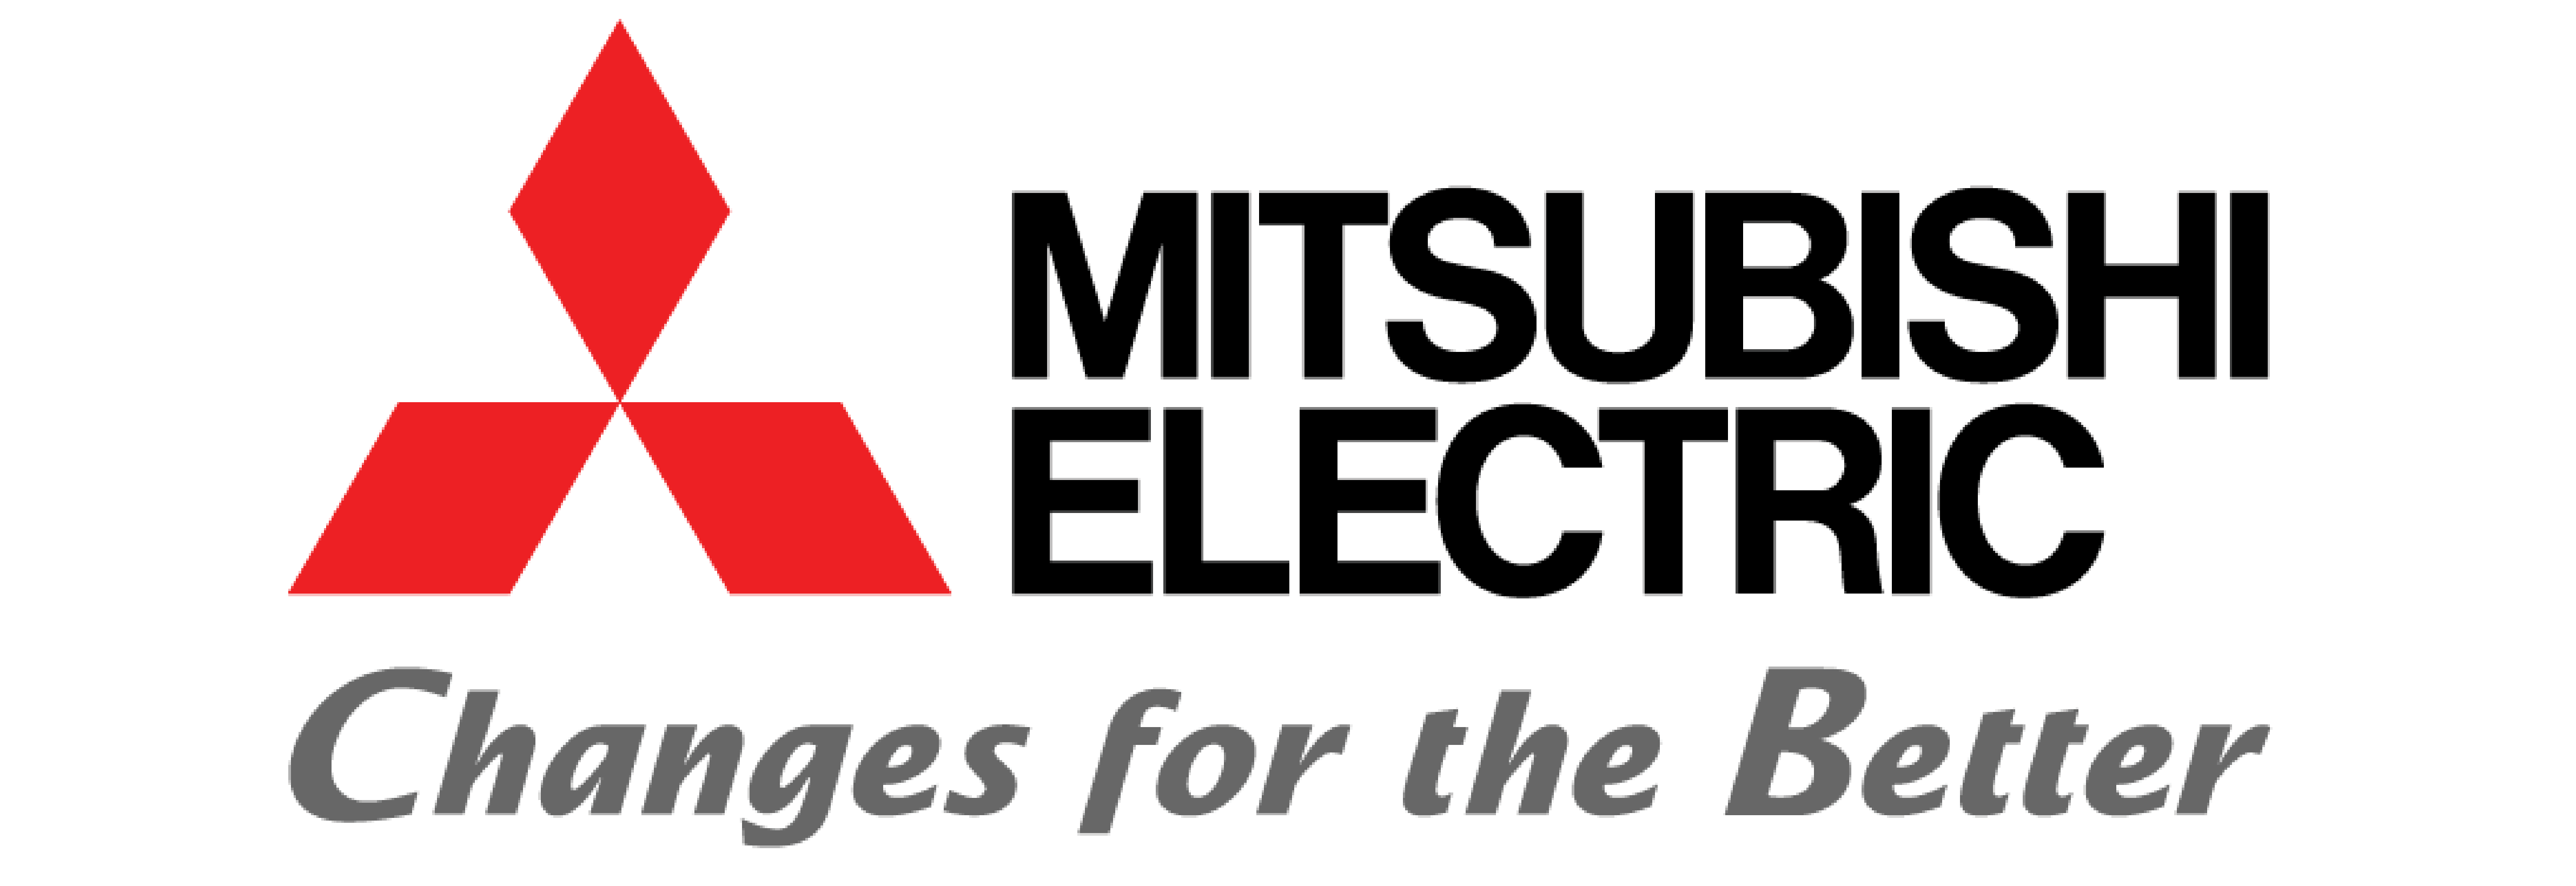 Mitsubishi Electric logo with tagline "changes for the better"